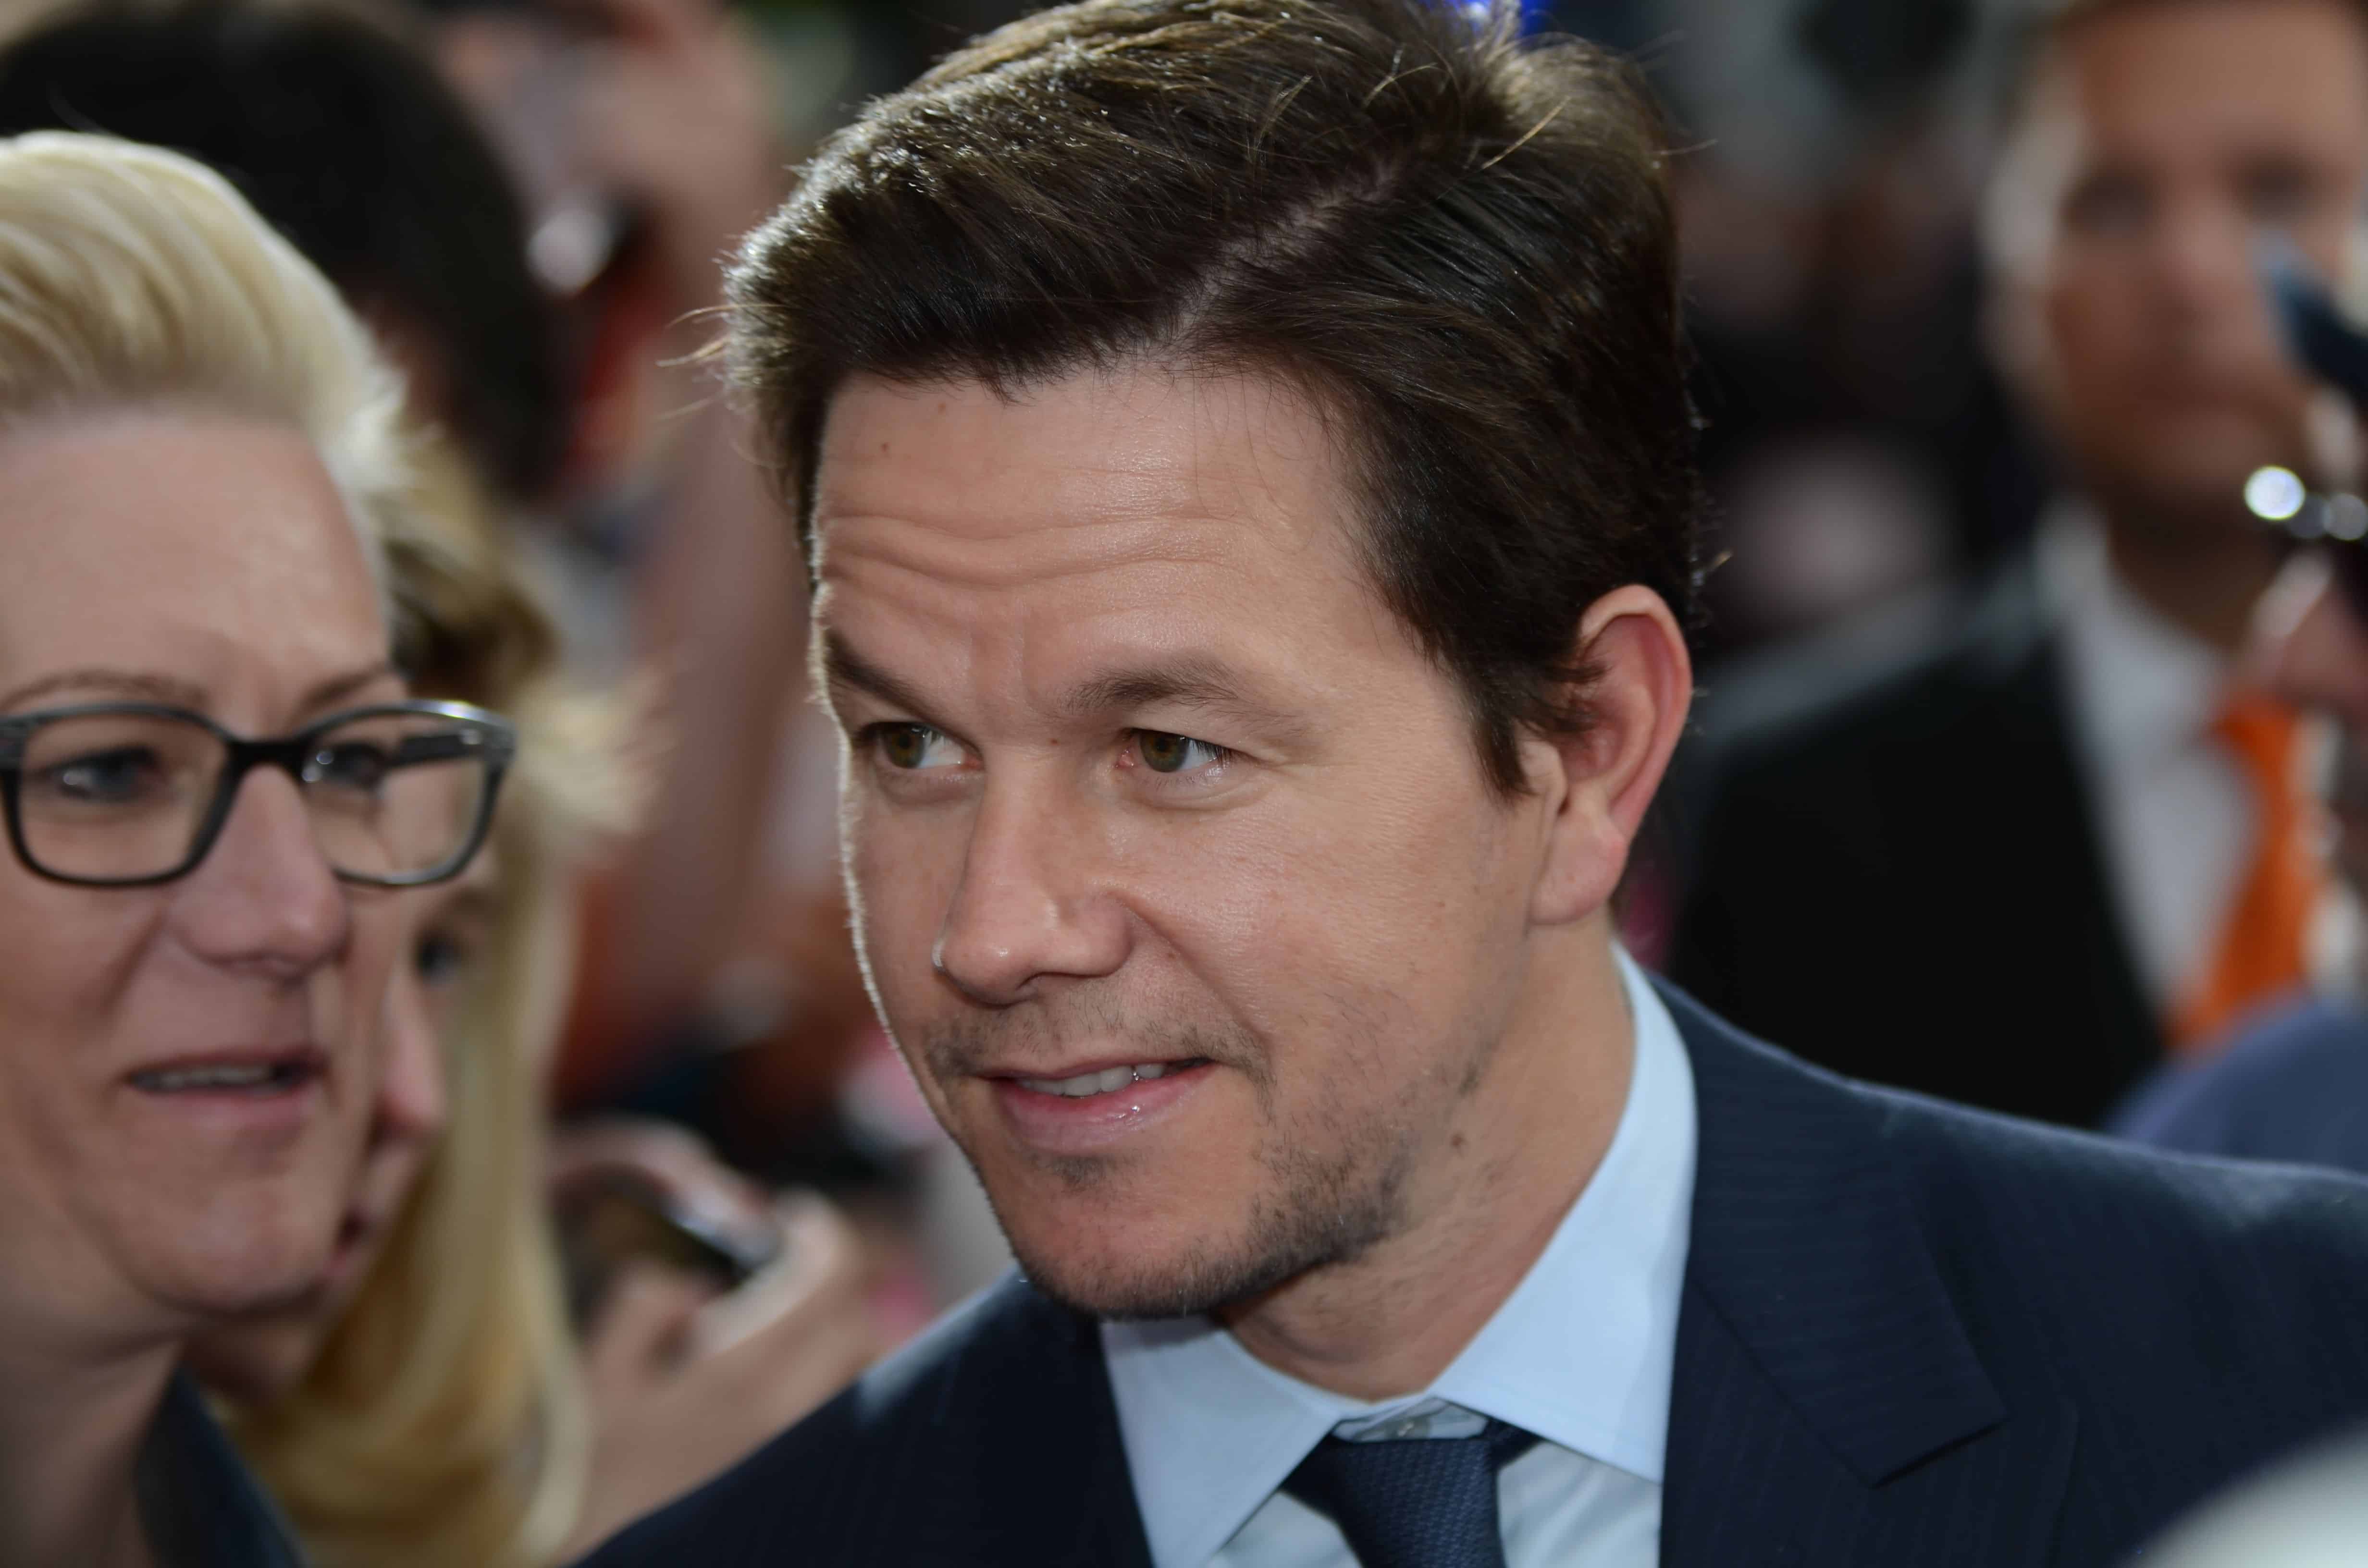 BERLIN - GERMANY - JUNE 29: Mark Wahlberg with Fans at the European premiere from Transformer 4 - Age of Extinction at CineStar,Sony Center on June 29, 2014 in Berlin, Germany.